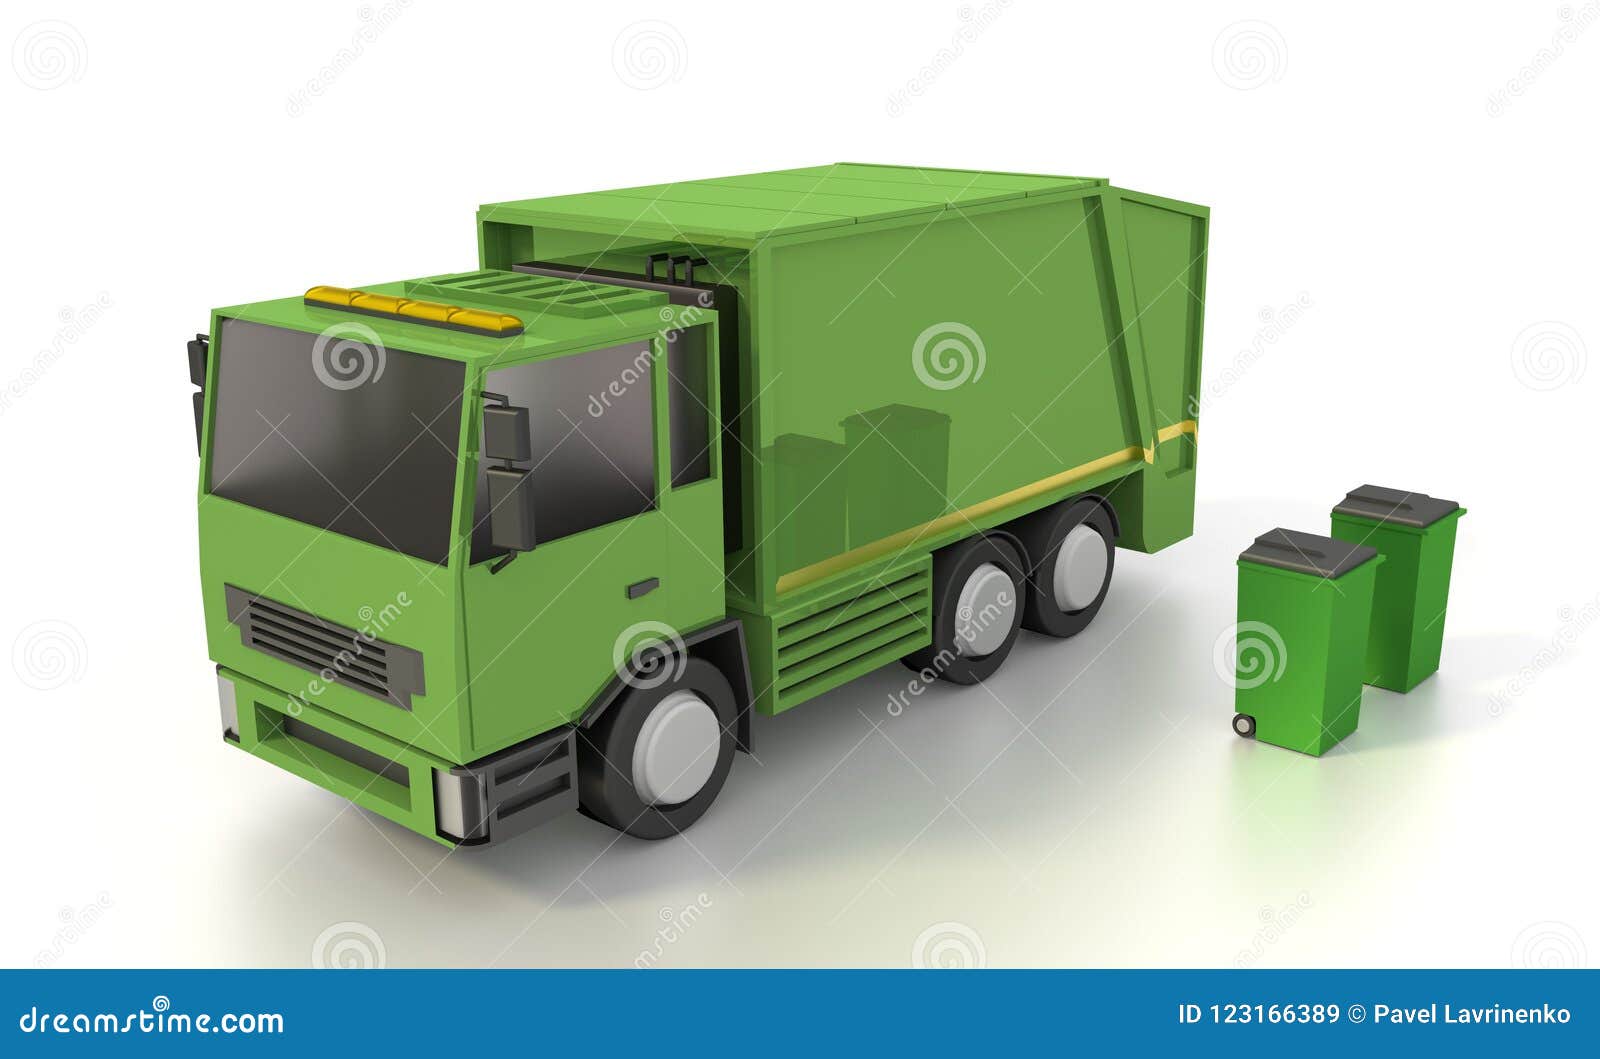 Garbage Truck With Two Garbage Cans 3d Rendering Stock Illustration Illustration Of Industrial Recycling 123166389